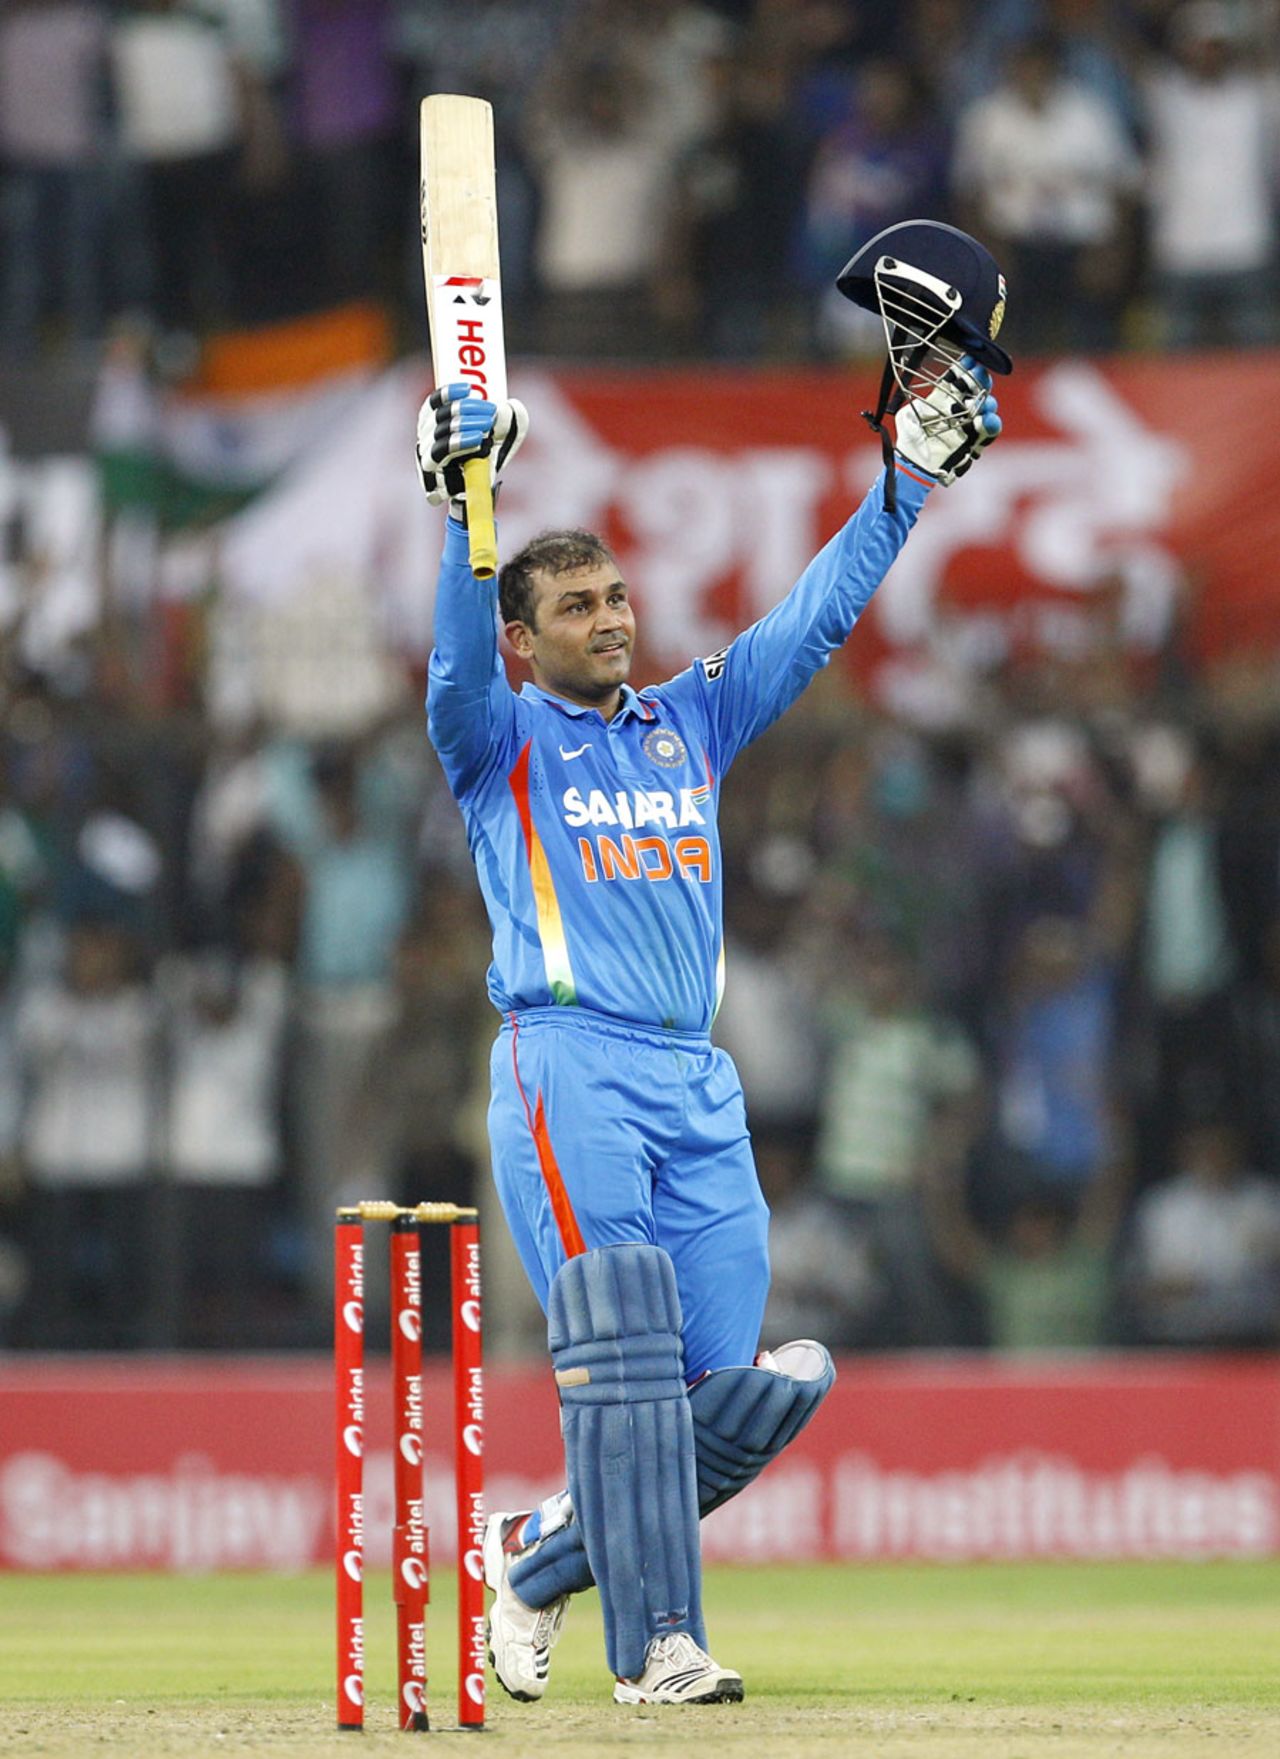 Virender Sehwag celebrates his record-breaking double-hundred, India v West Indies, 4th ODI, Indore, December 8, 2011